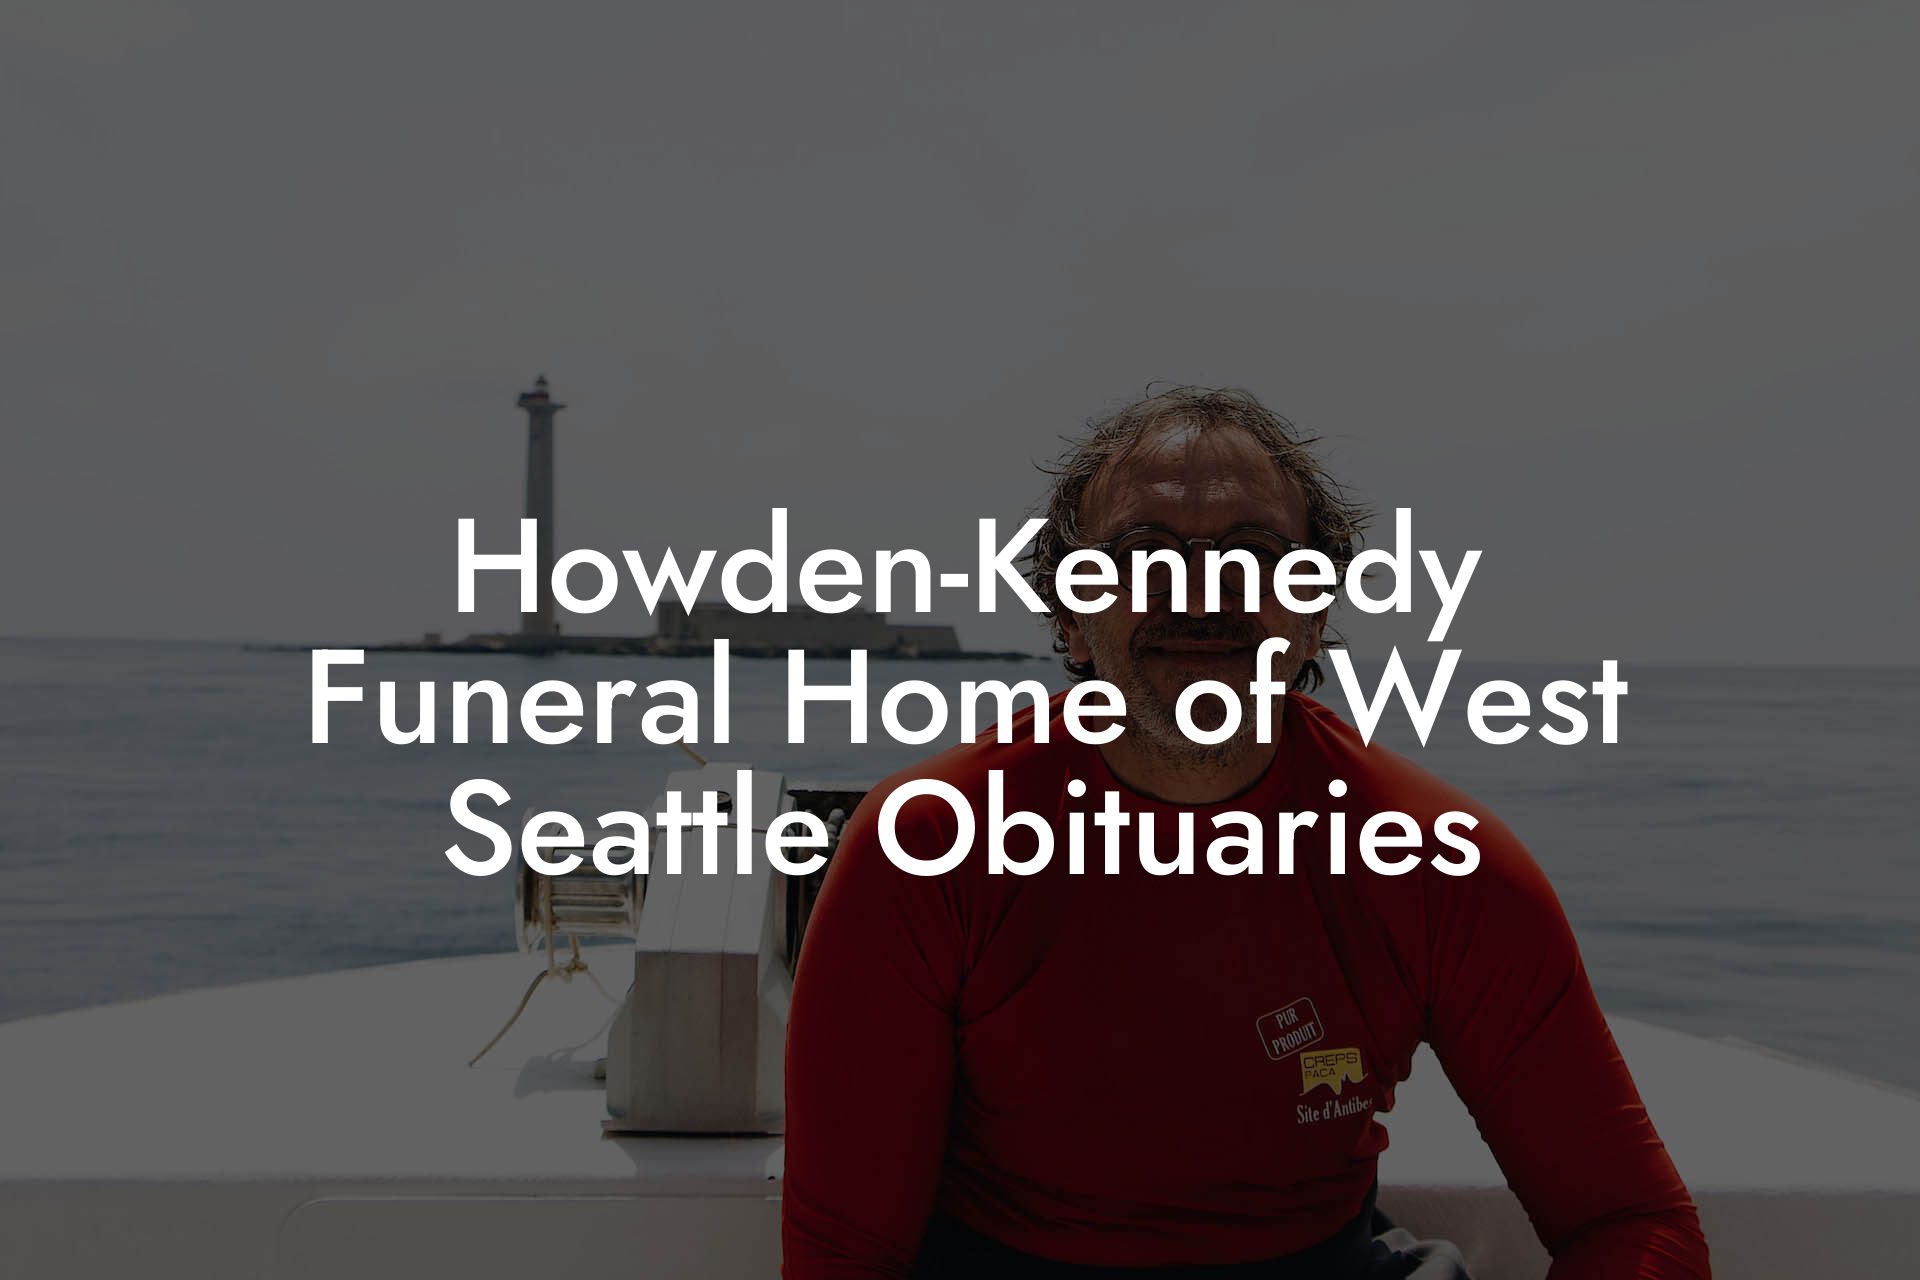 Howden-Kennedy Funeral Home of West Seattle Obituaries